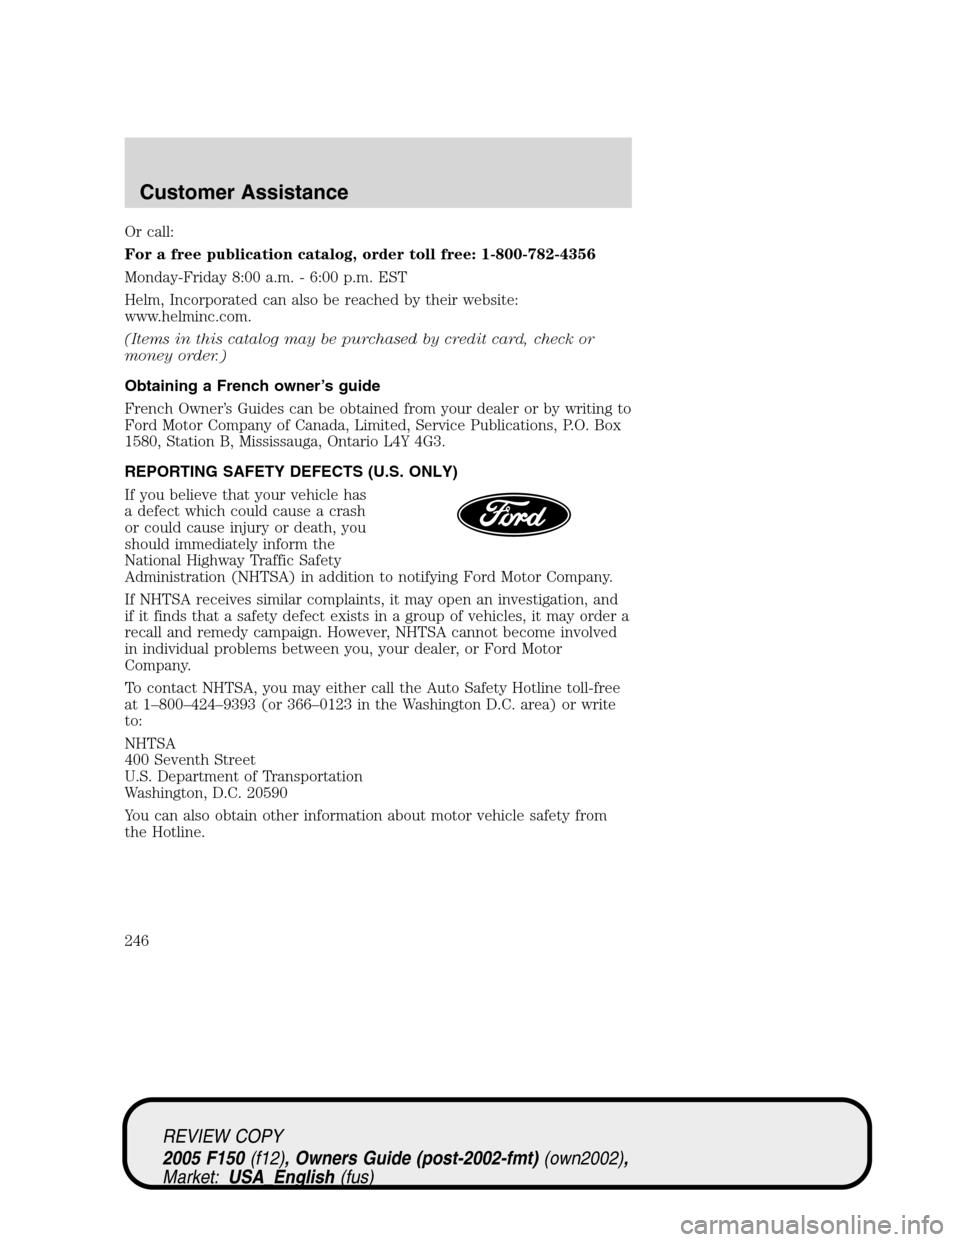 FORD F150 2005 11.G Owners Manual Or call:
For a free publication catalog, order toll free: 1-800-782-4356
Monday-Friday 8:00 a.m. - 6:00 p.m. EST
Helm, Incorporated can also be reached by their website:
www.helminc.com.
(Items in thi